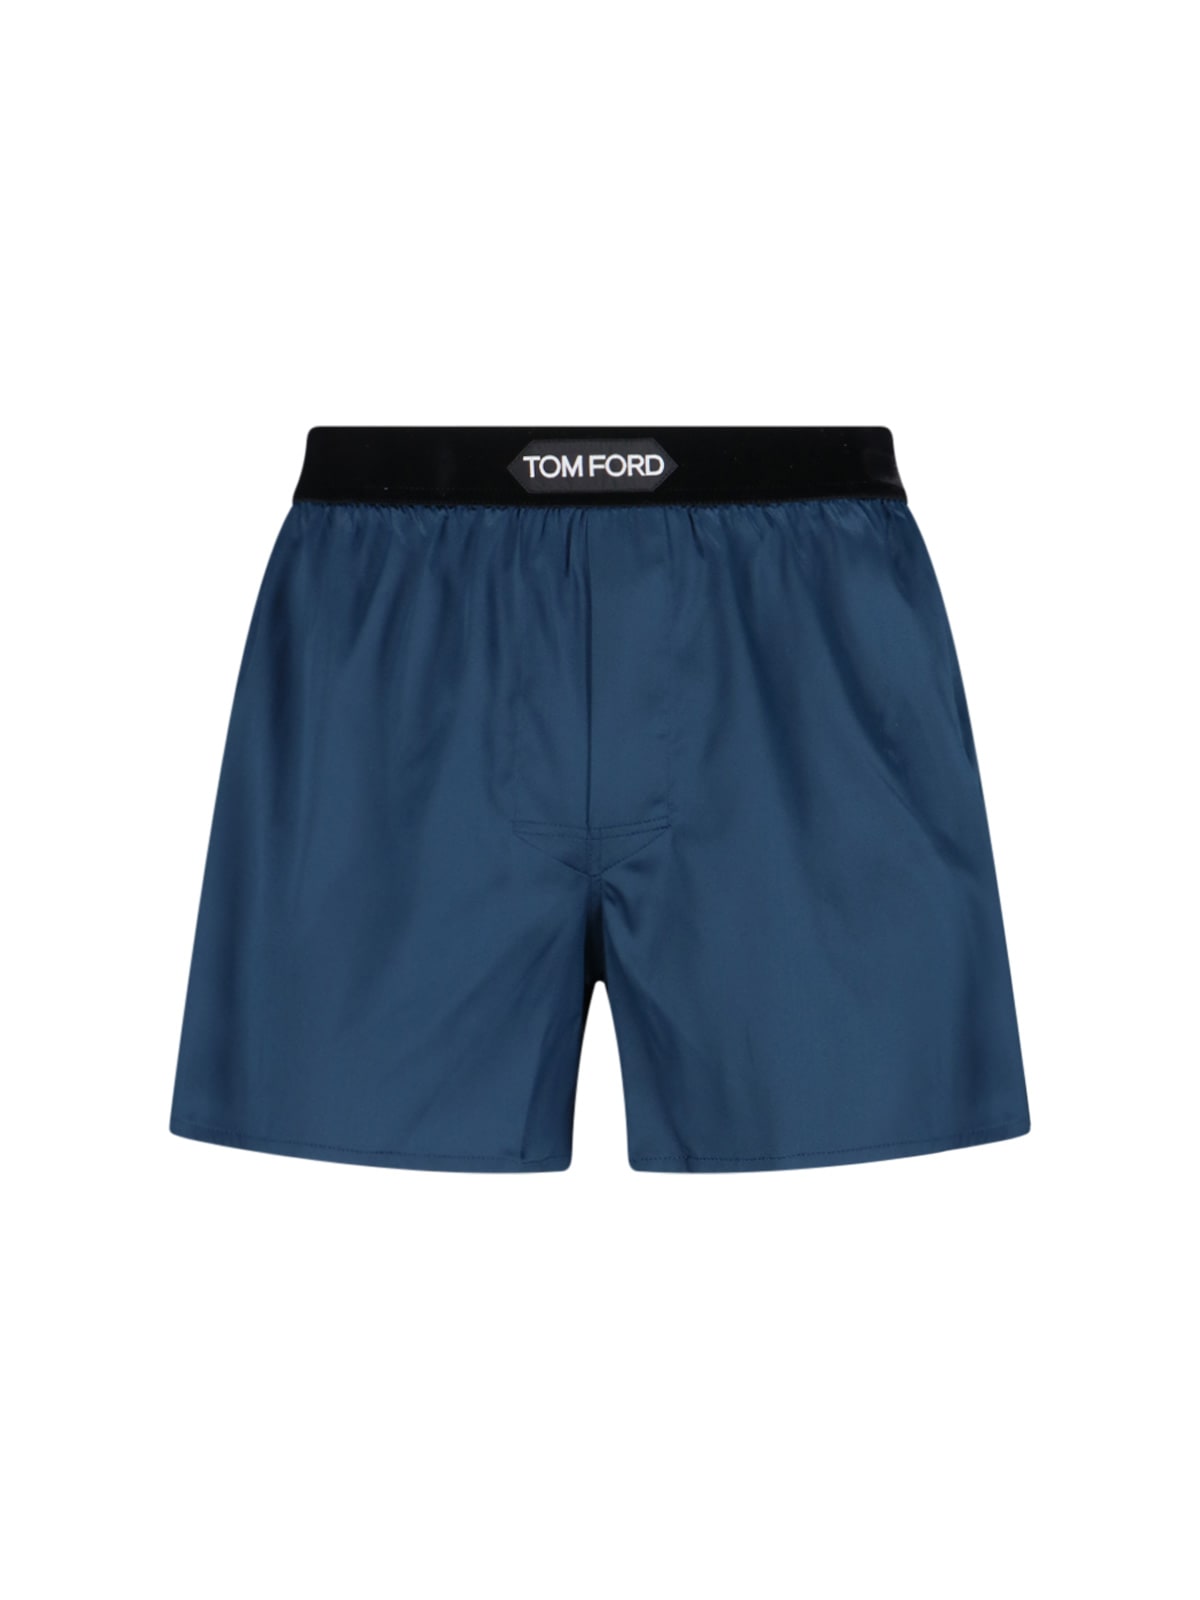 Tom Ford Logo Boxer Shorts In Blue